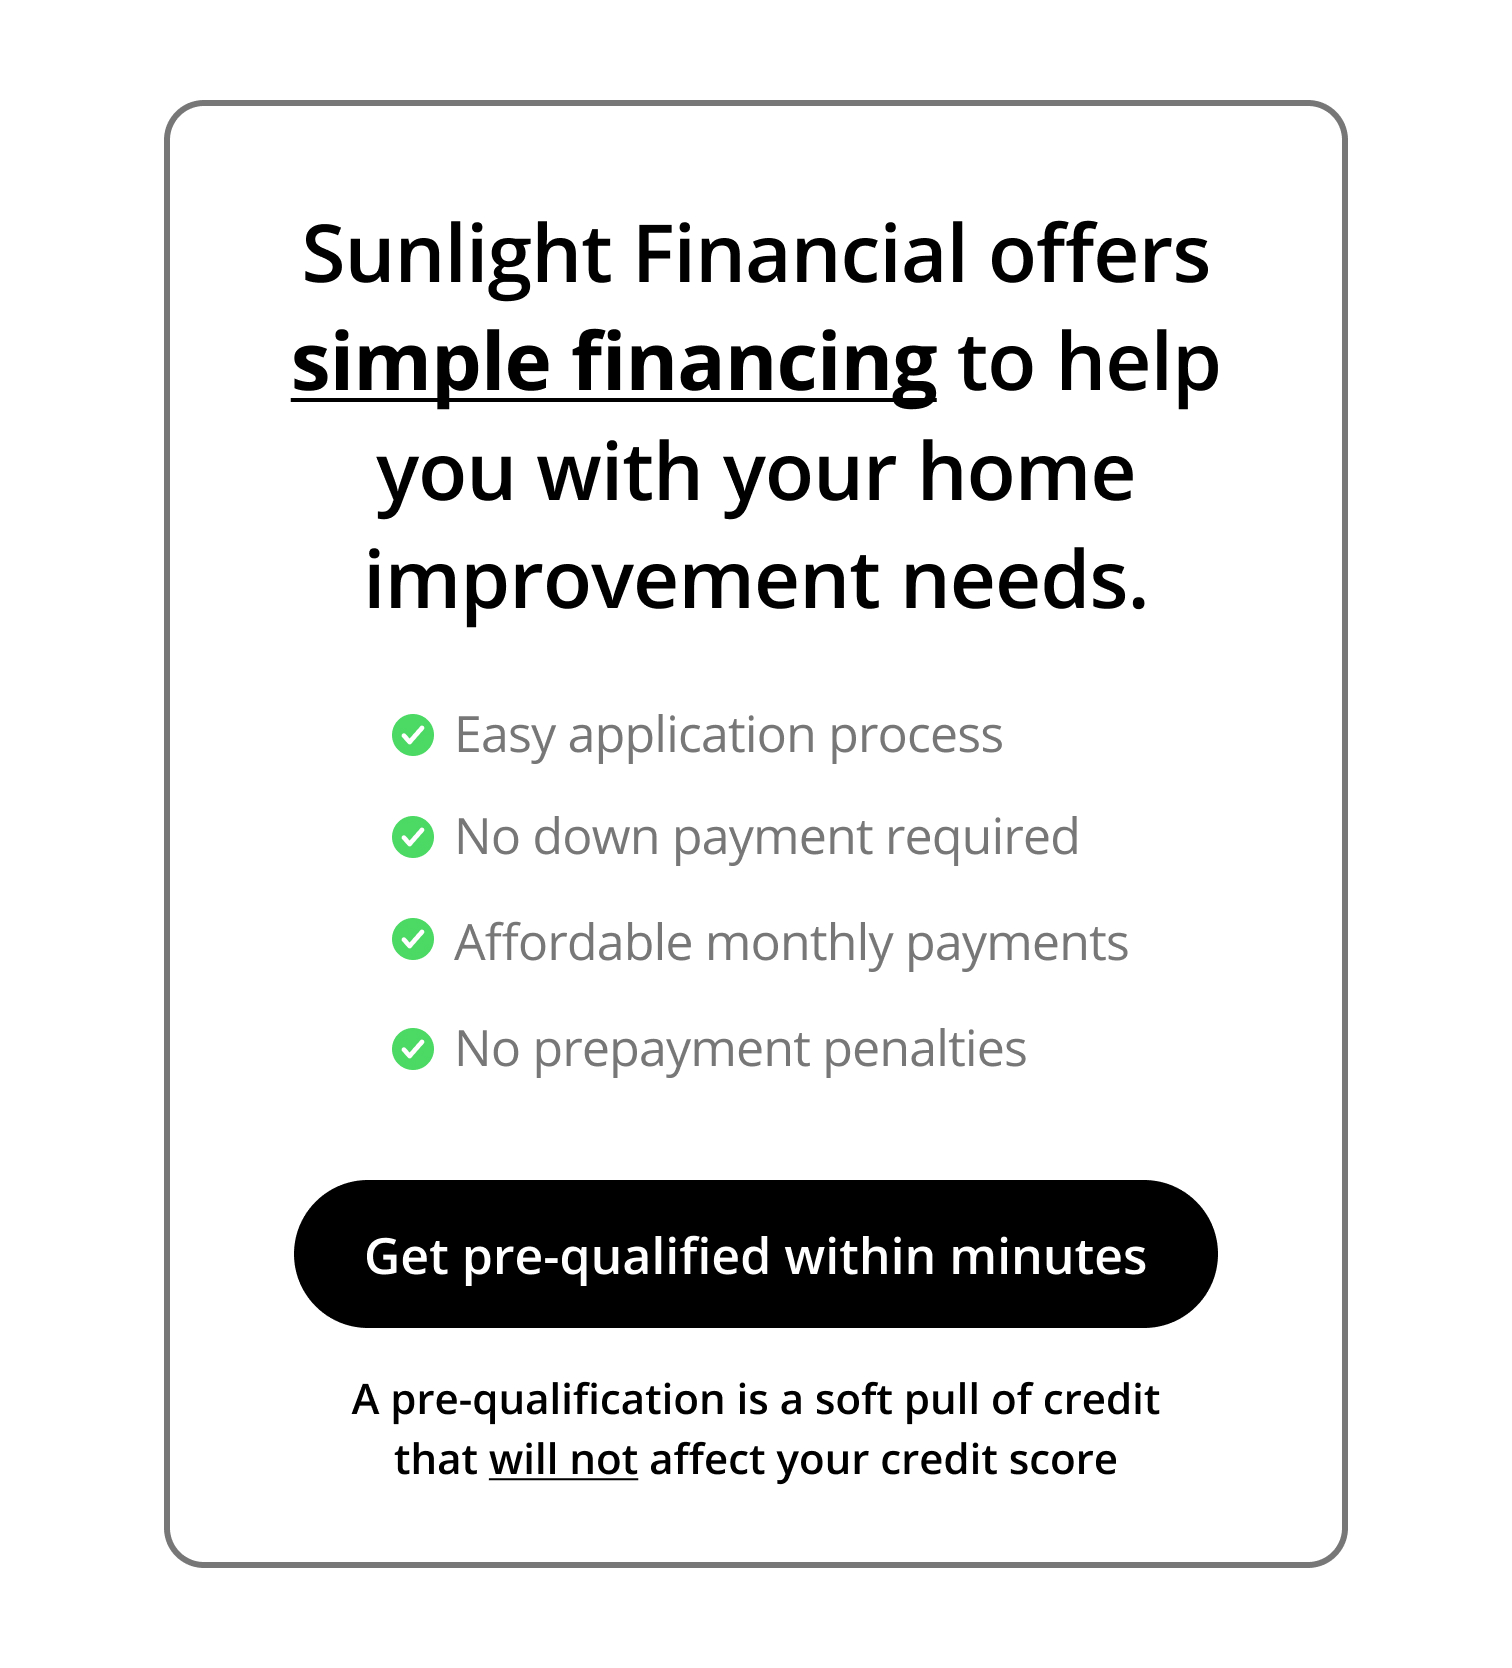 Get Pre-qualified for a Sunlight Financial loan